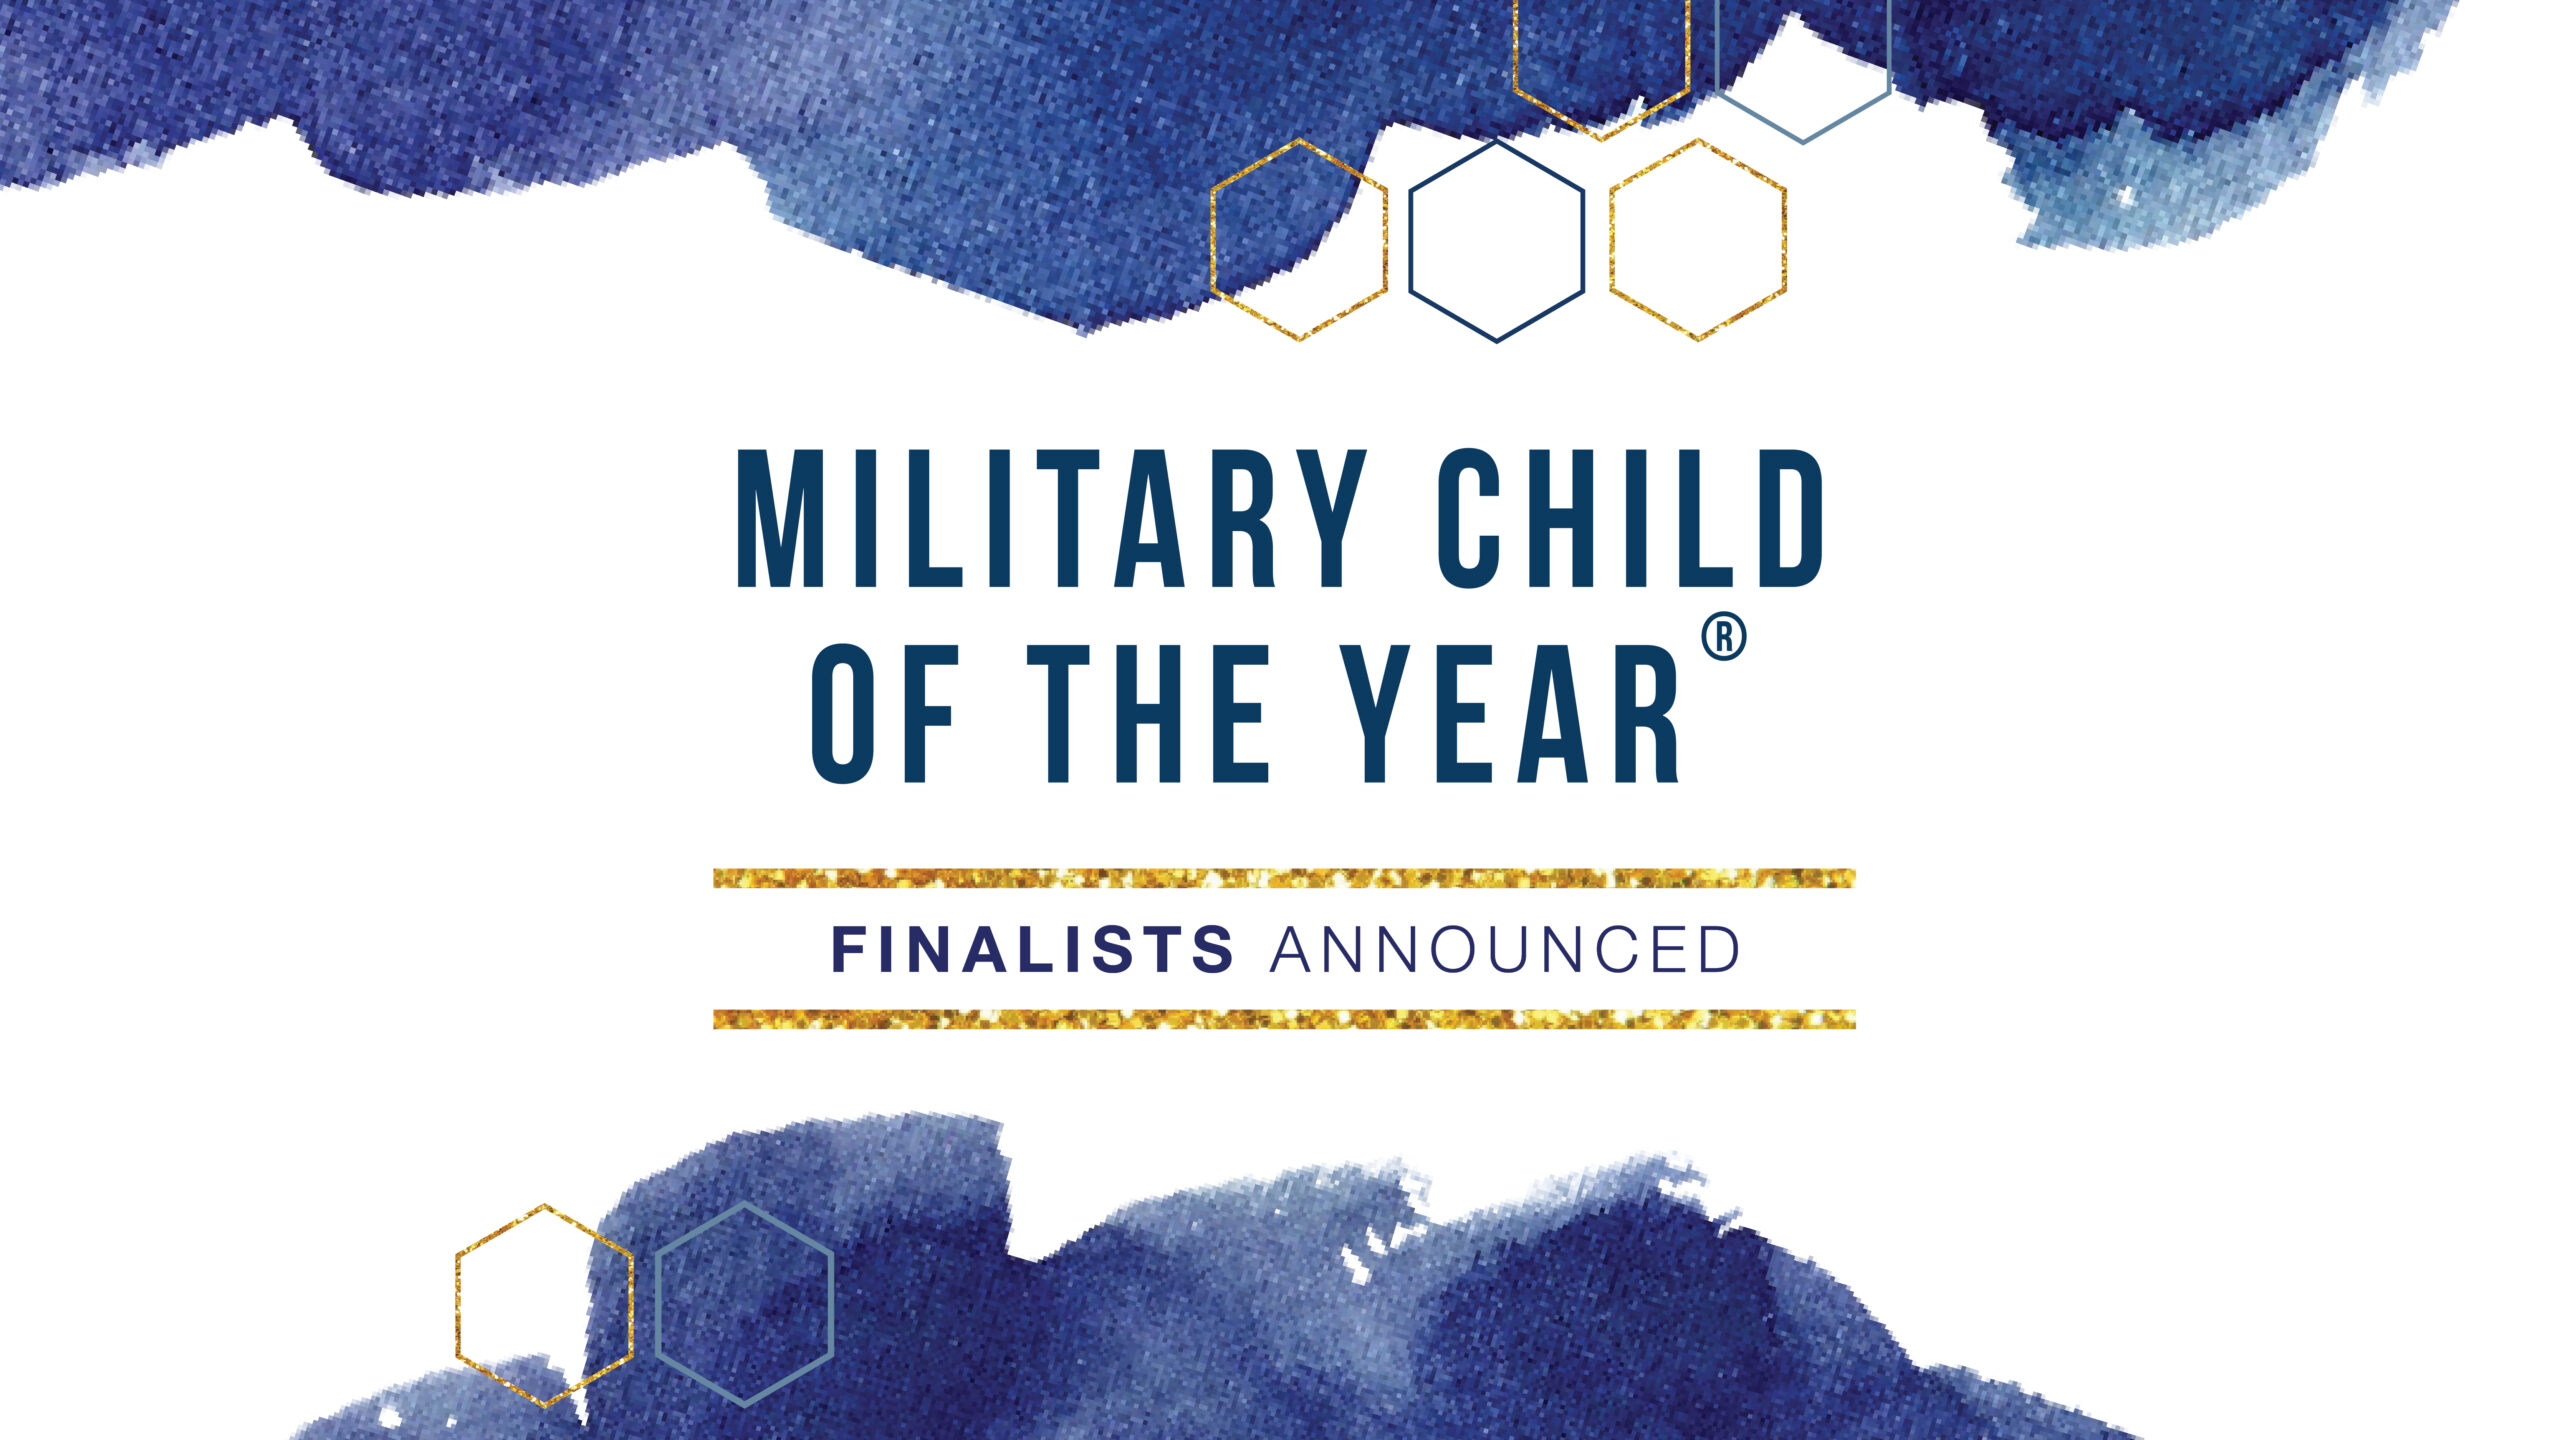 Military Child of the Year® 2022 Finalists Operation Homefront